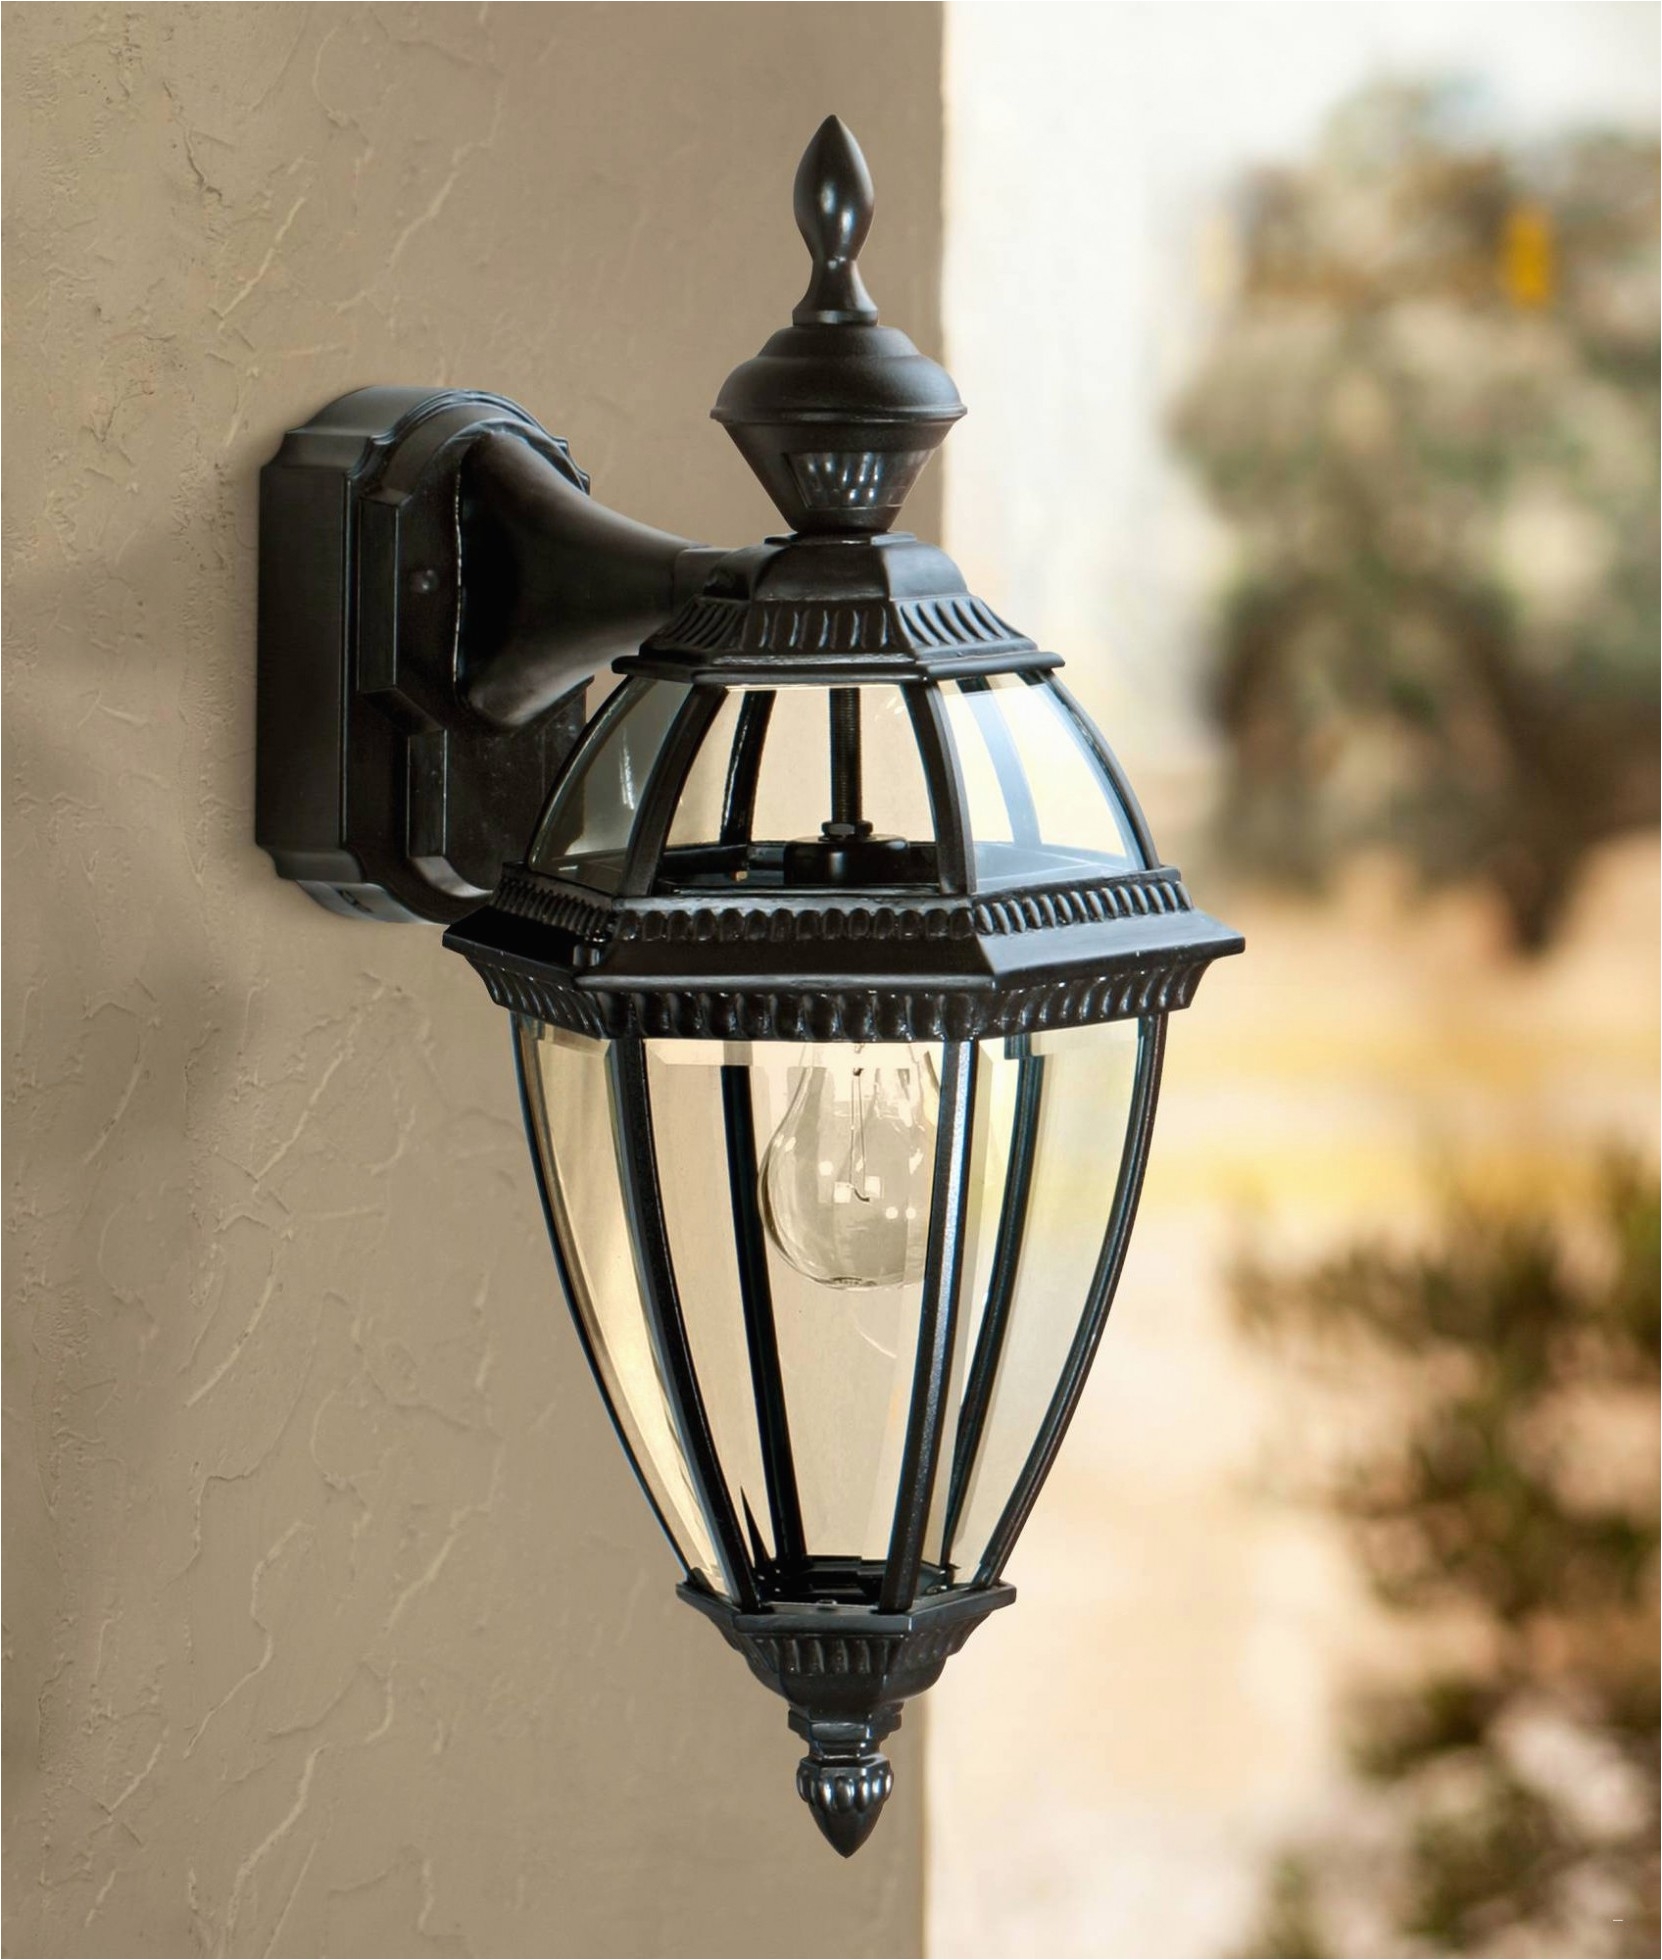 Yard Lights Lowes 32 Creative Exterior Lights Lowes Ohits Just Perfect